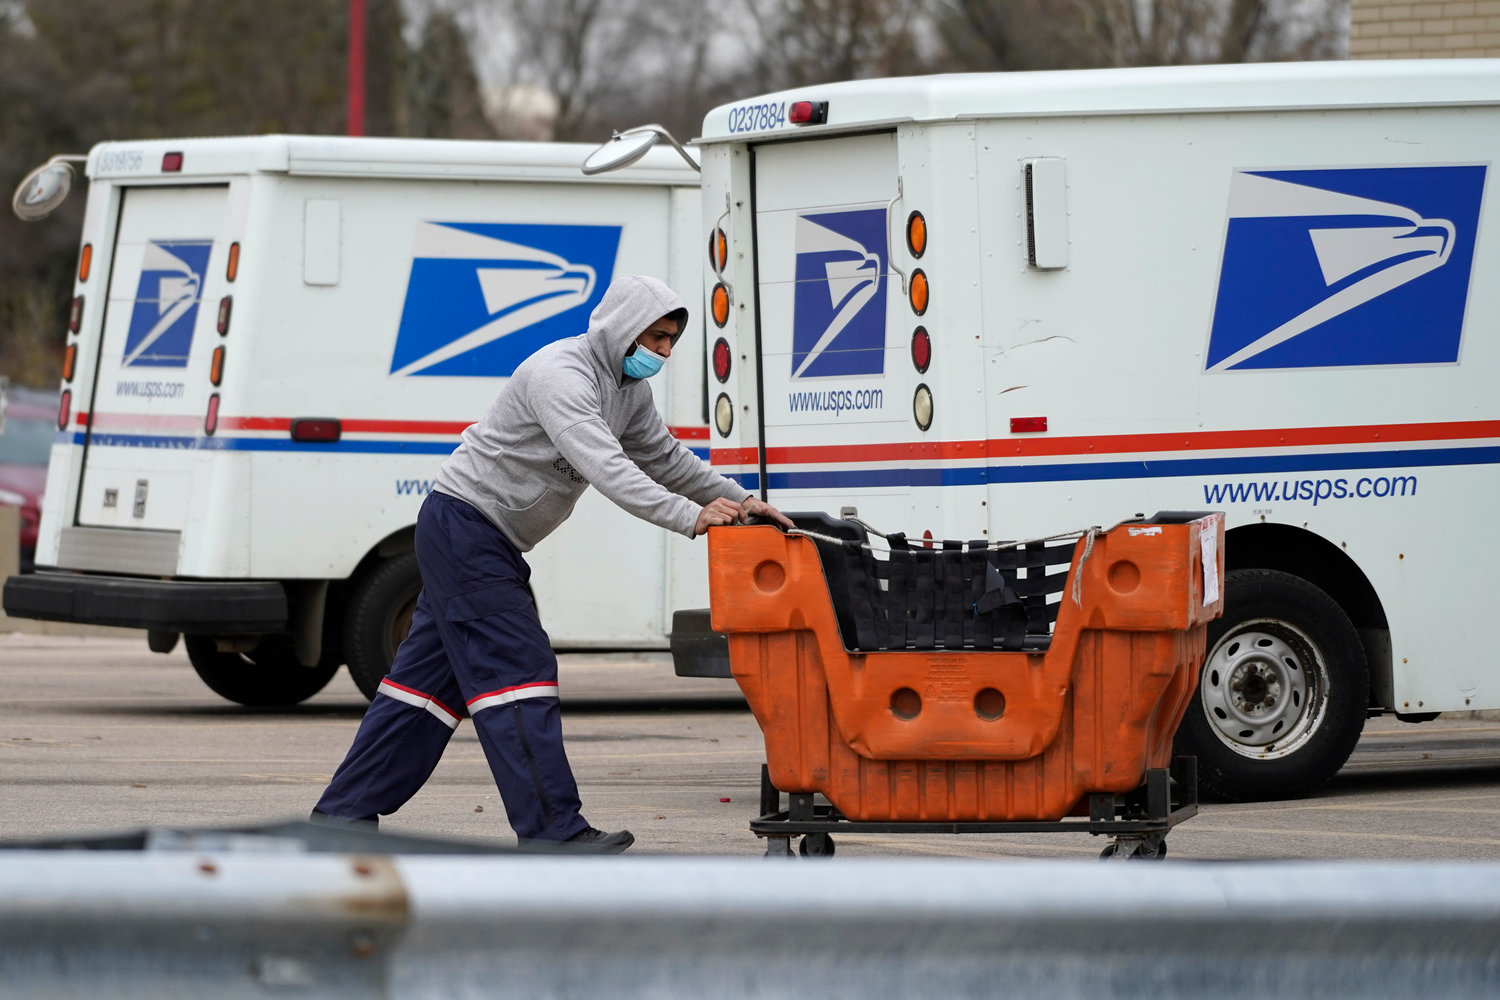 A United States Postal Service employee works outside a post office in Wheeling, Ill., in this 2021 file photo. The nation's major shipping companies are in the best shape to get holiday shoppers’ packages delivered on time since the start of the pandemic, suggesting a return to normalcy.